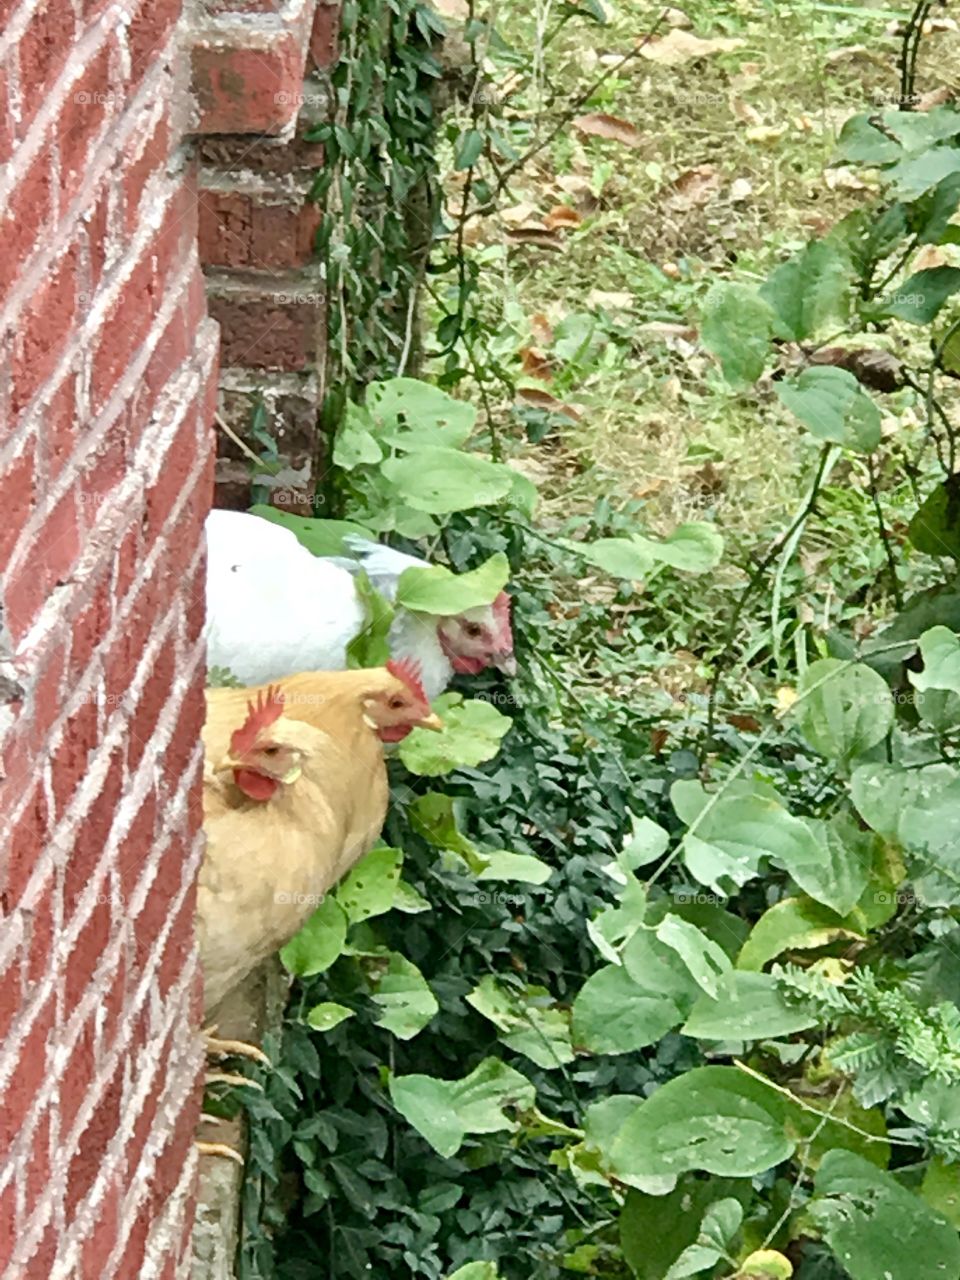 Three Chickens, Brick Wall, Green Plants and Leaves